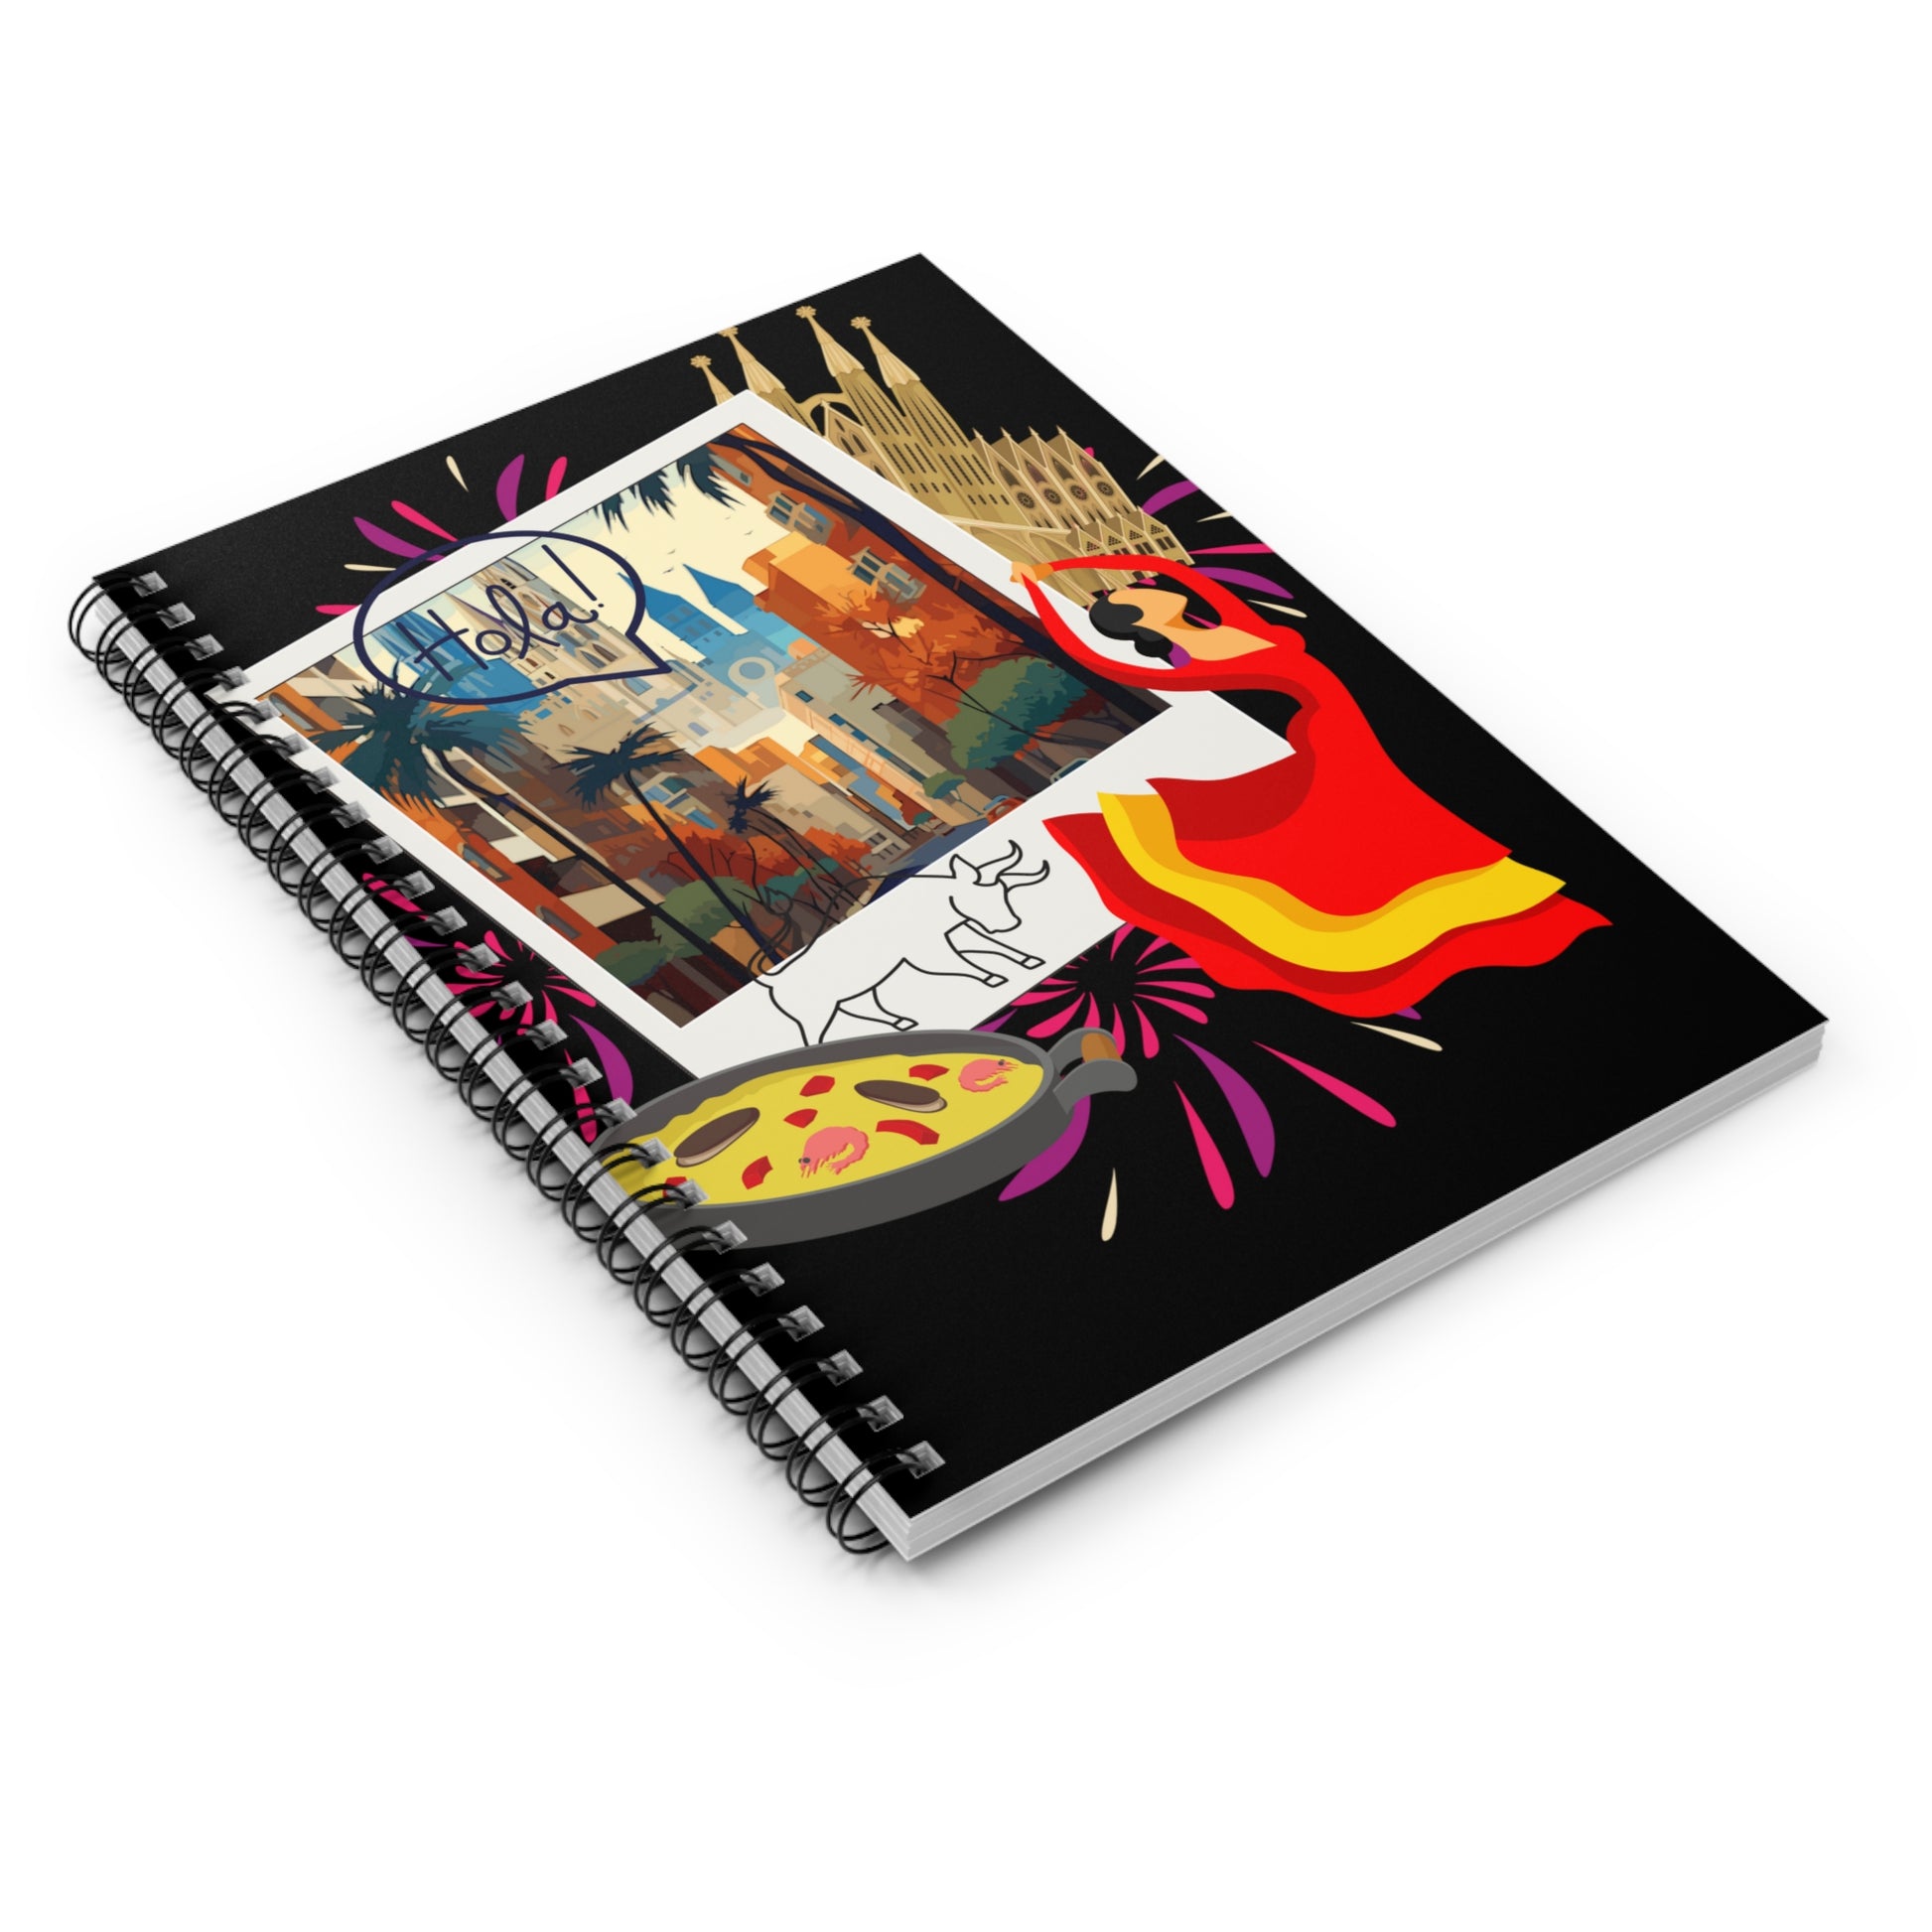 Hola Madrid: Spiral Notebook - Log Books - Journals - Diaries - and More Custom Printed by TheGlassyLass.com